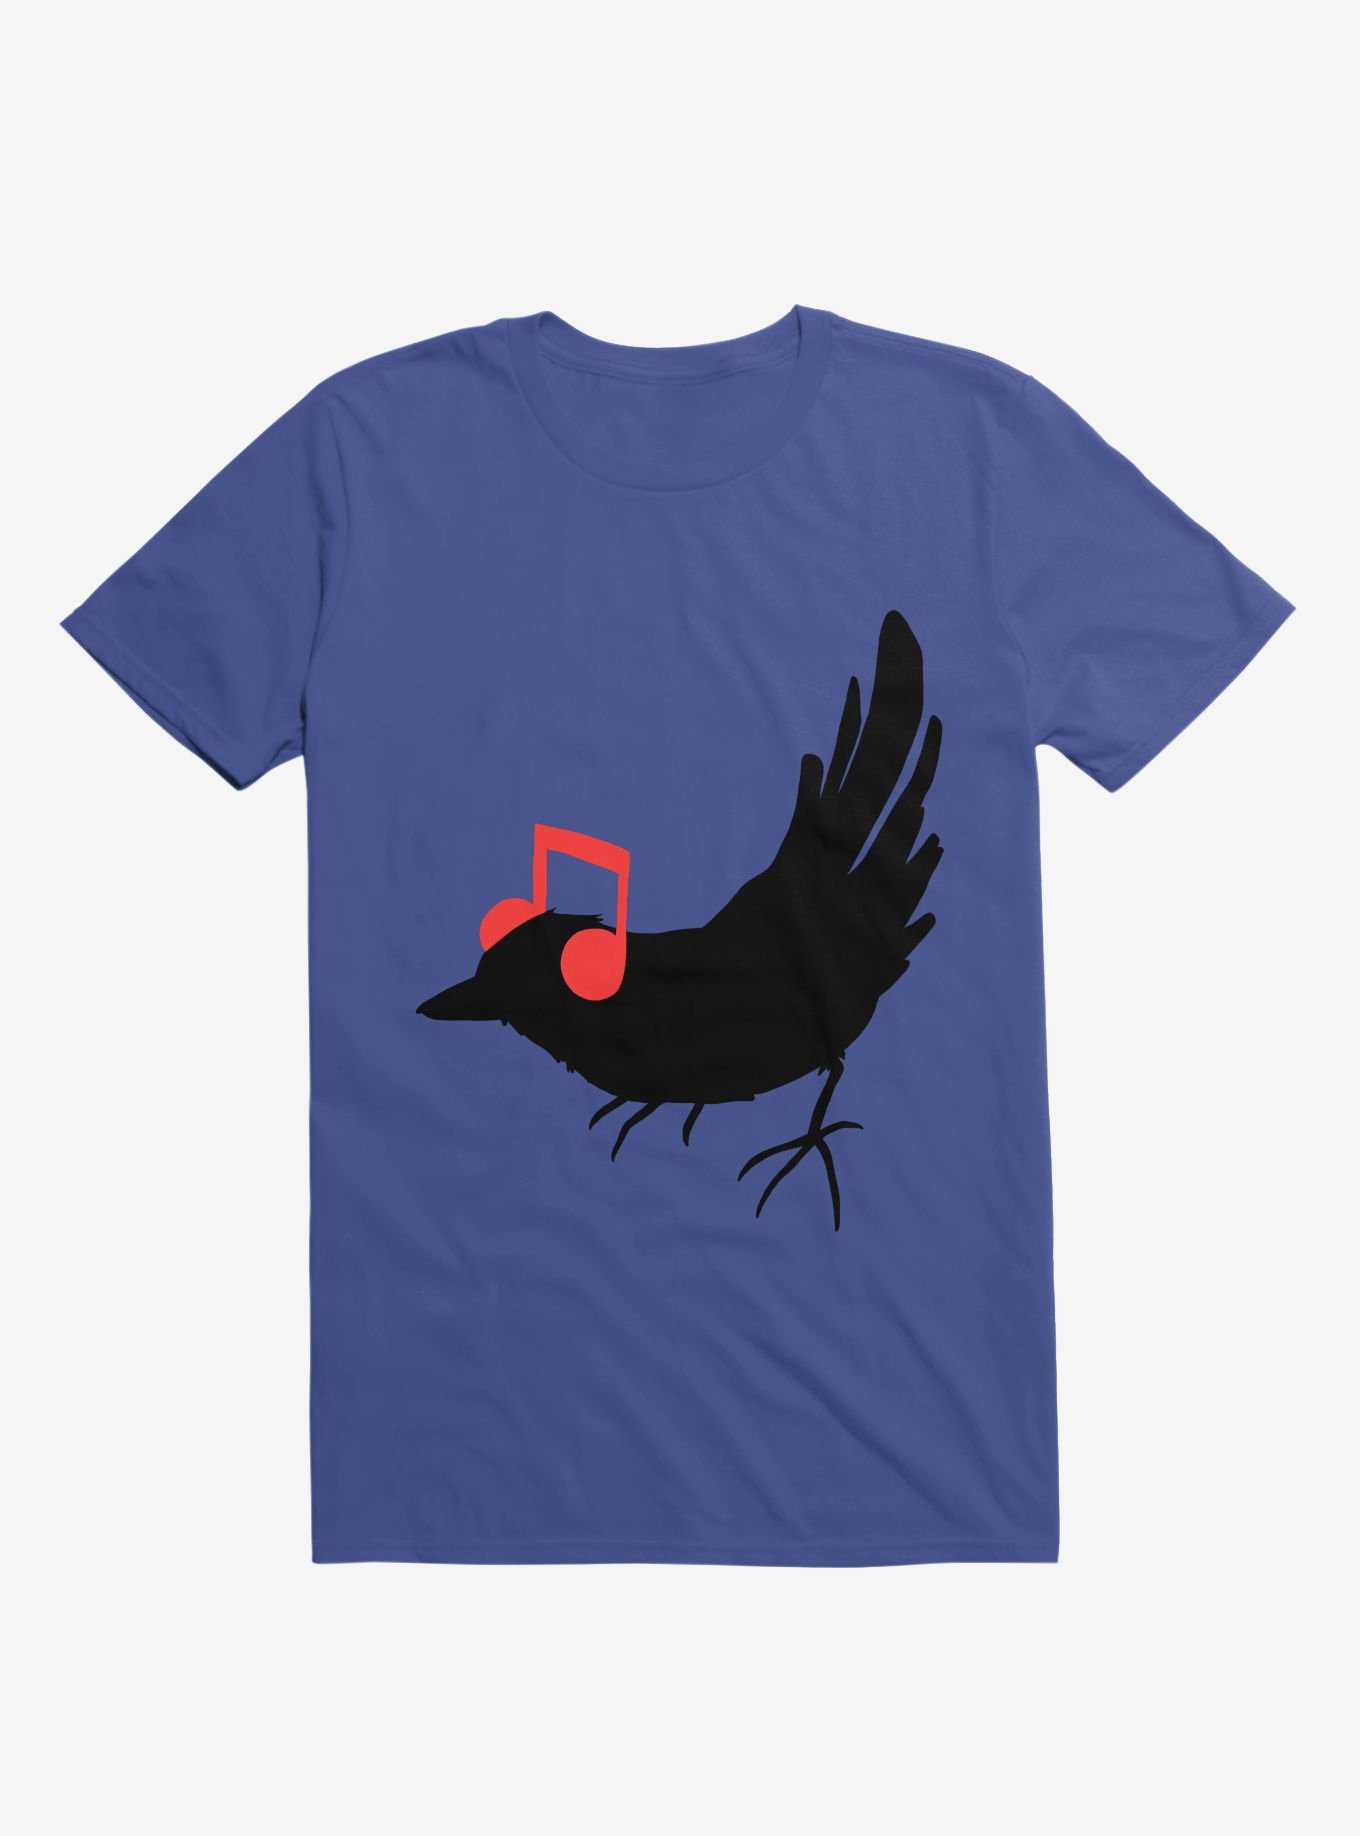 Listening To My Song T-Shirt, , hi-res